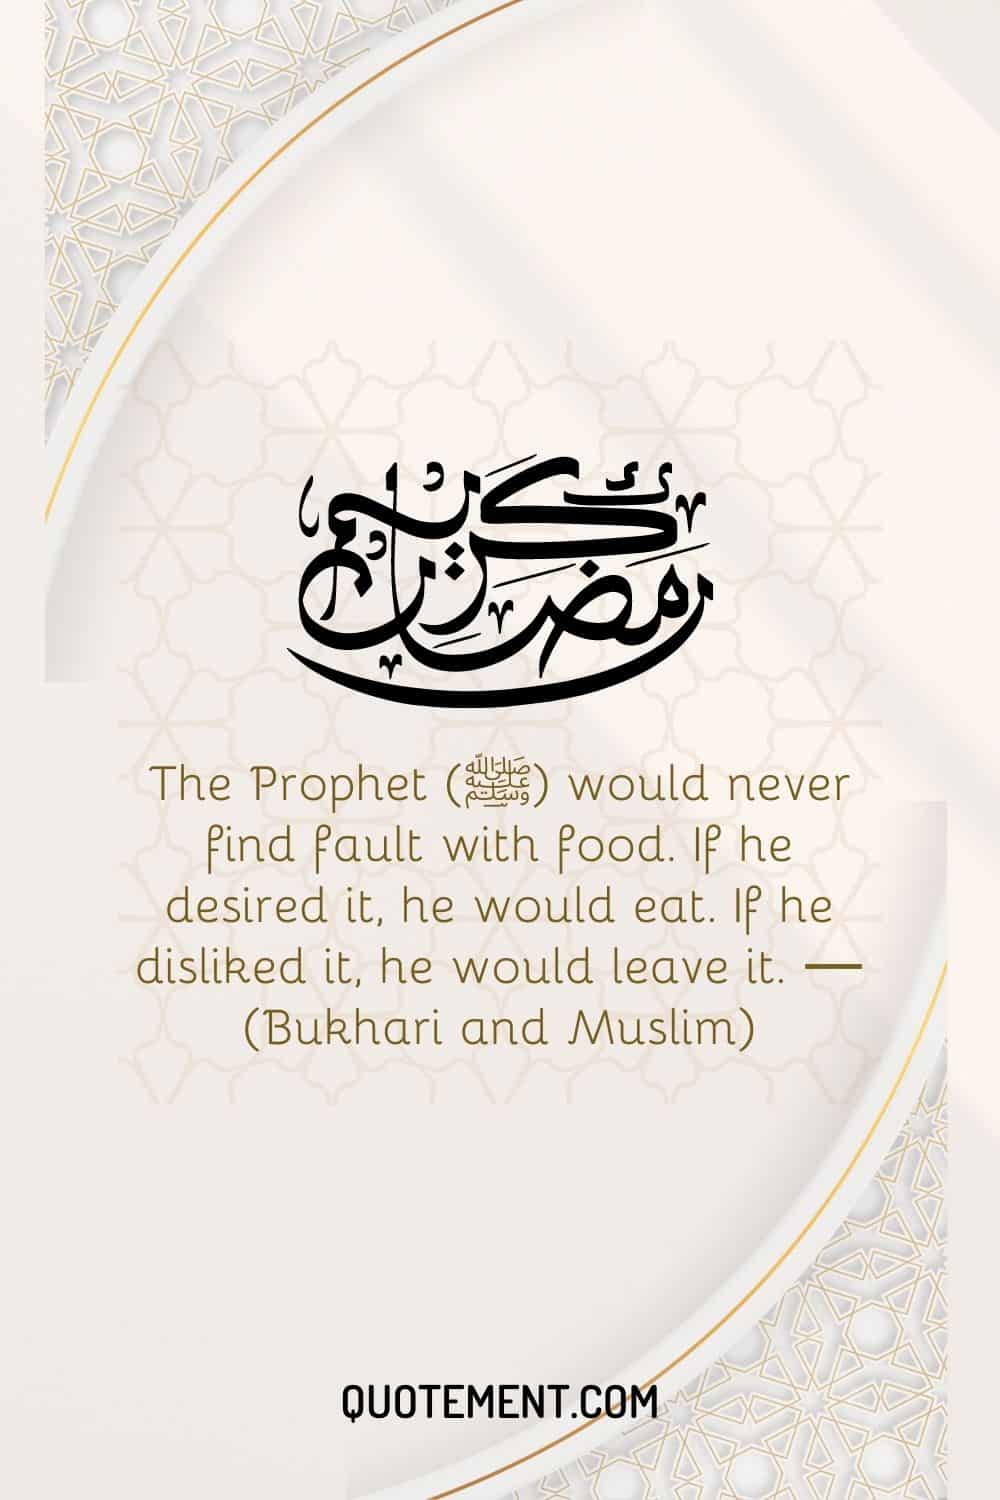 The Prophet (ﷺ) would never find fault with food